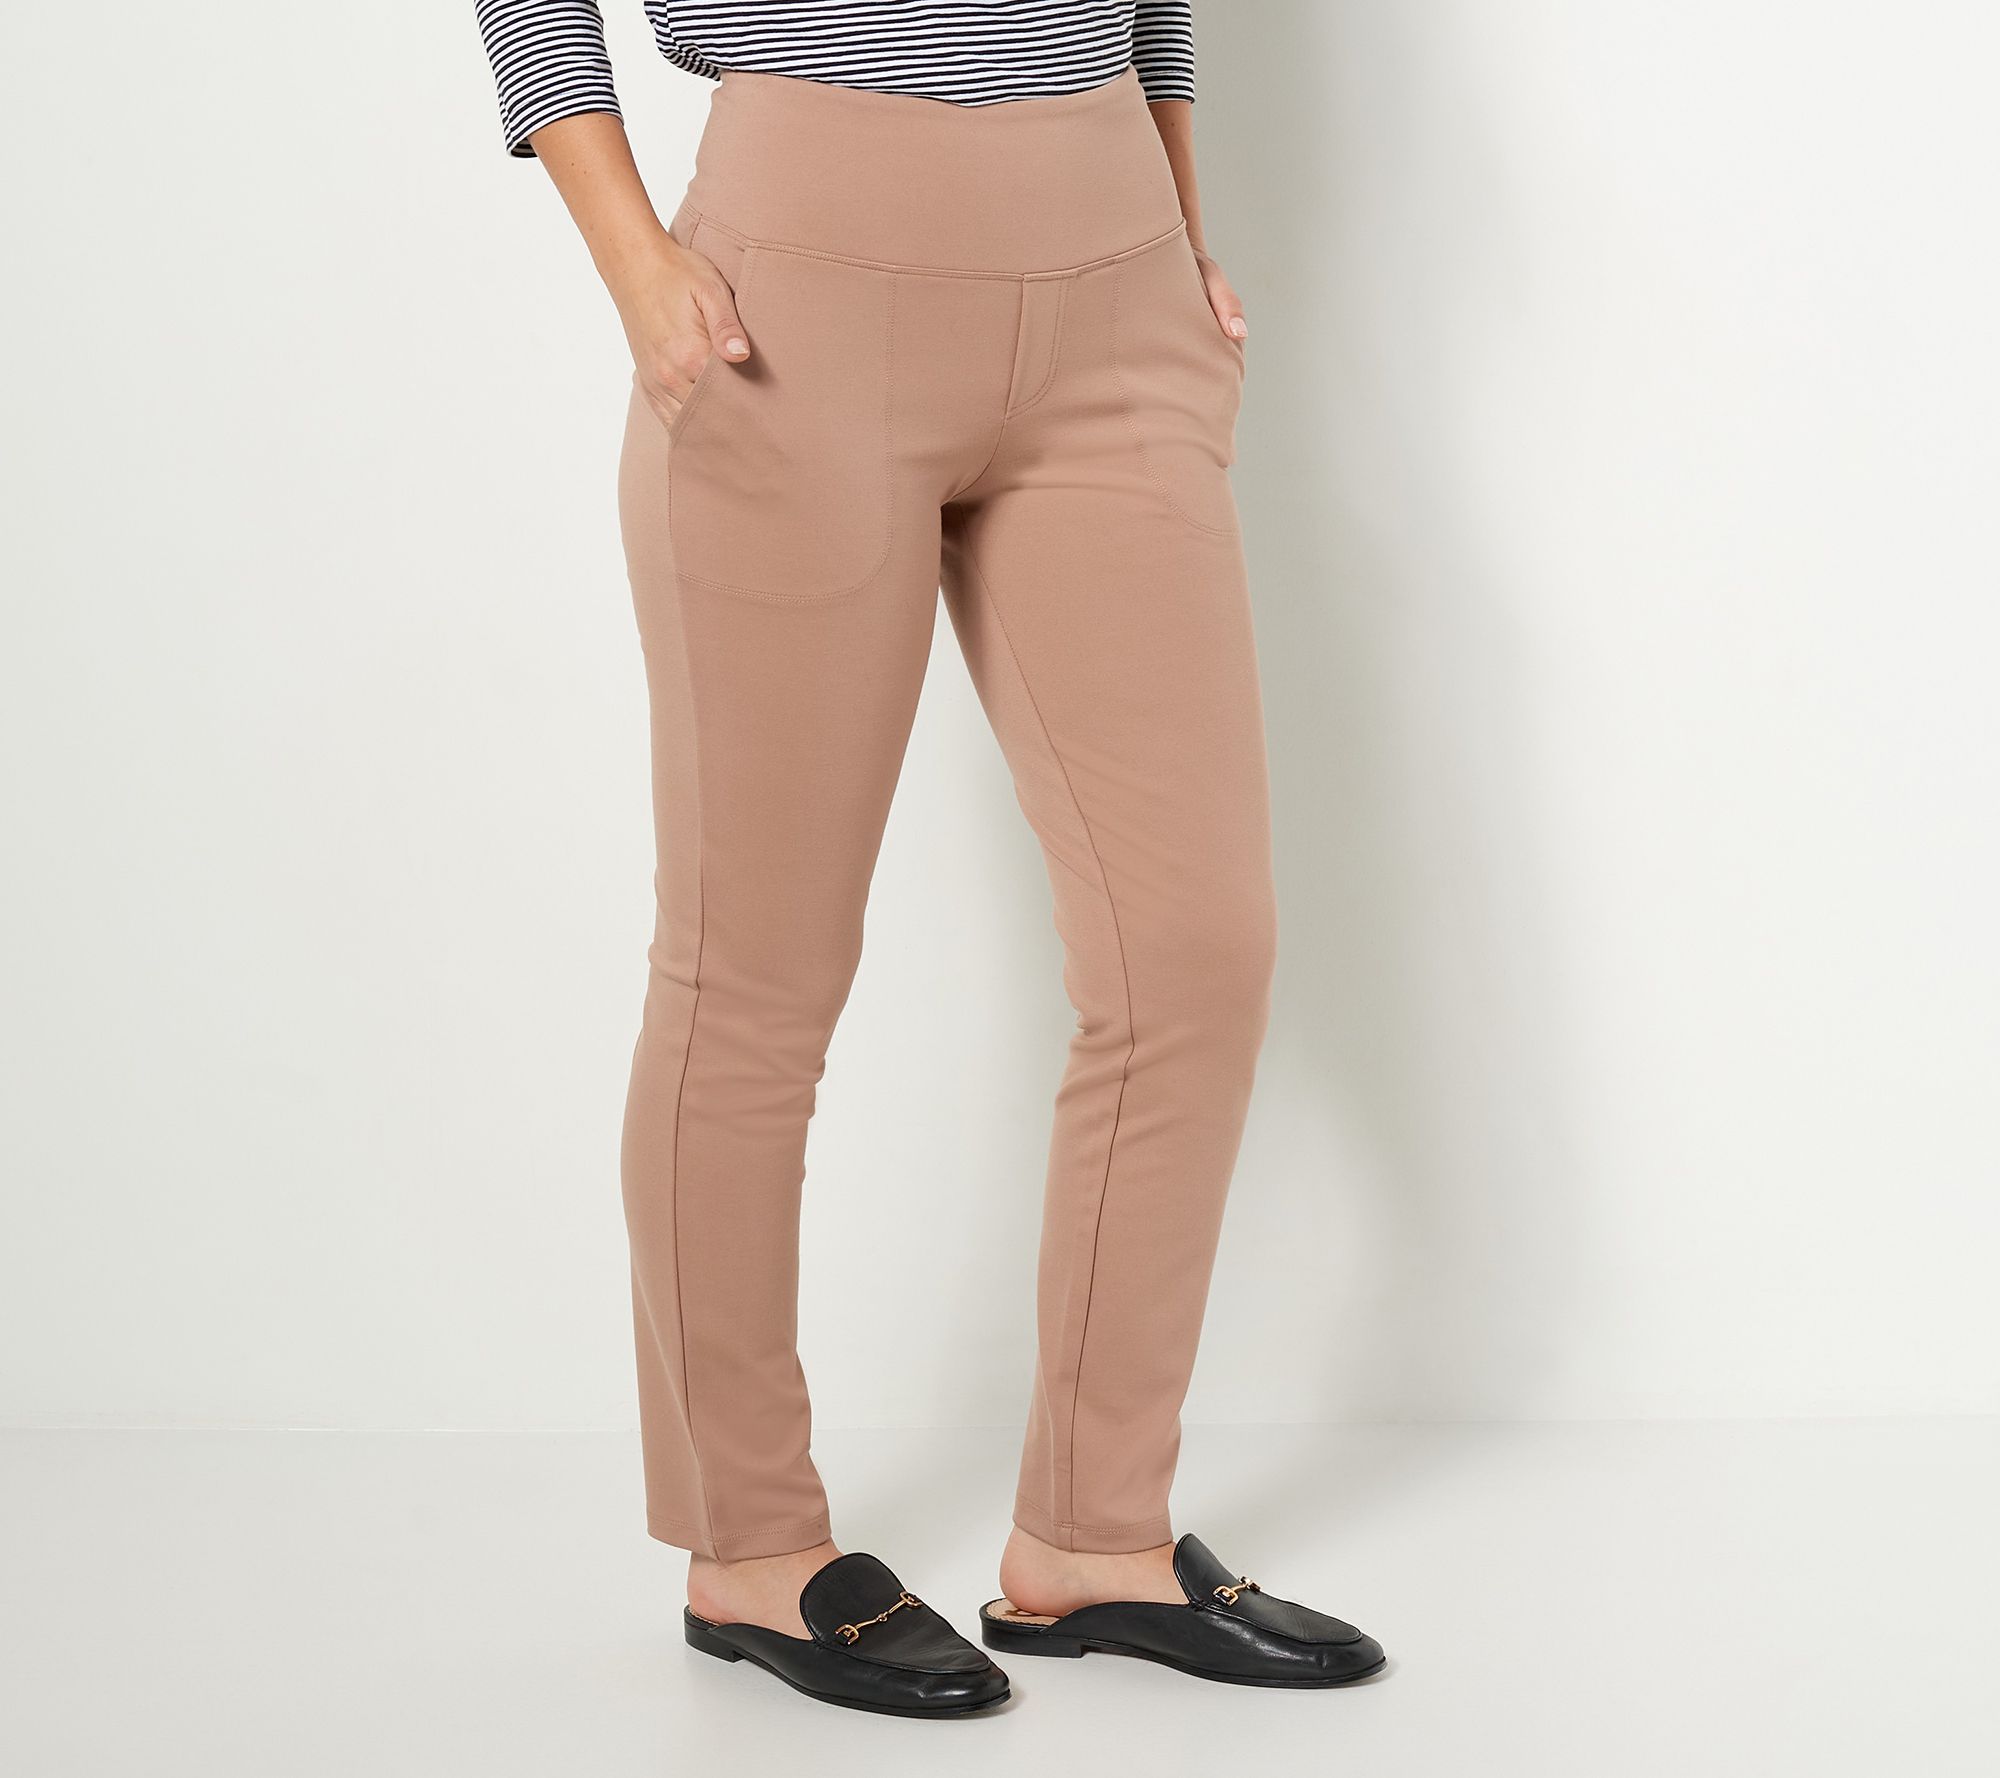 Style & Co Women's Mid-rise Ponte-knit Pants With Tummy Control